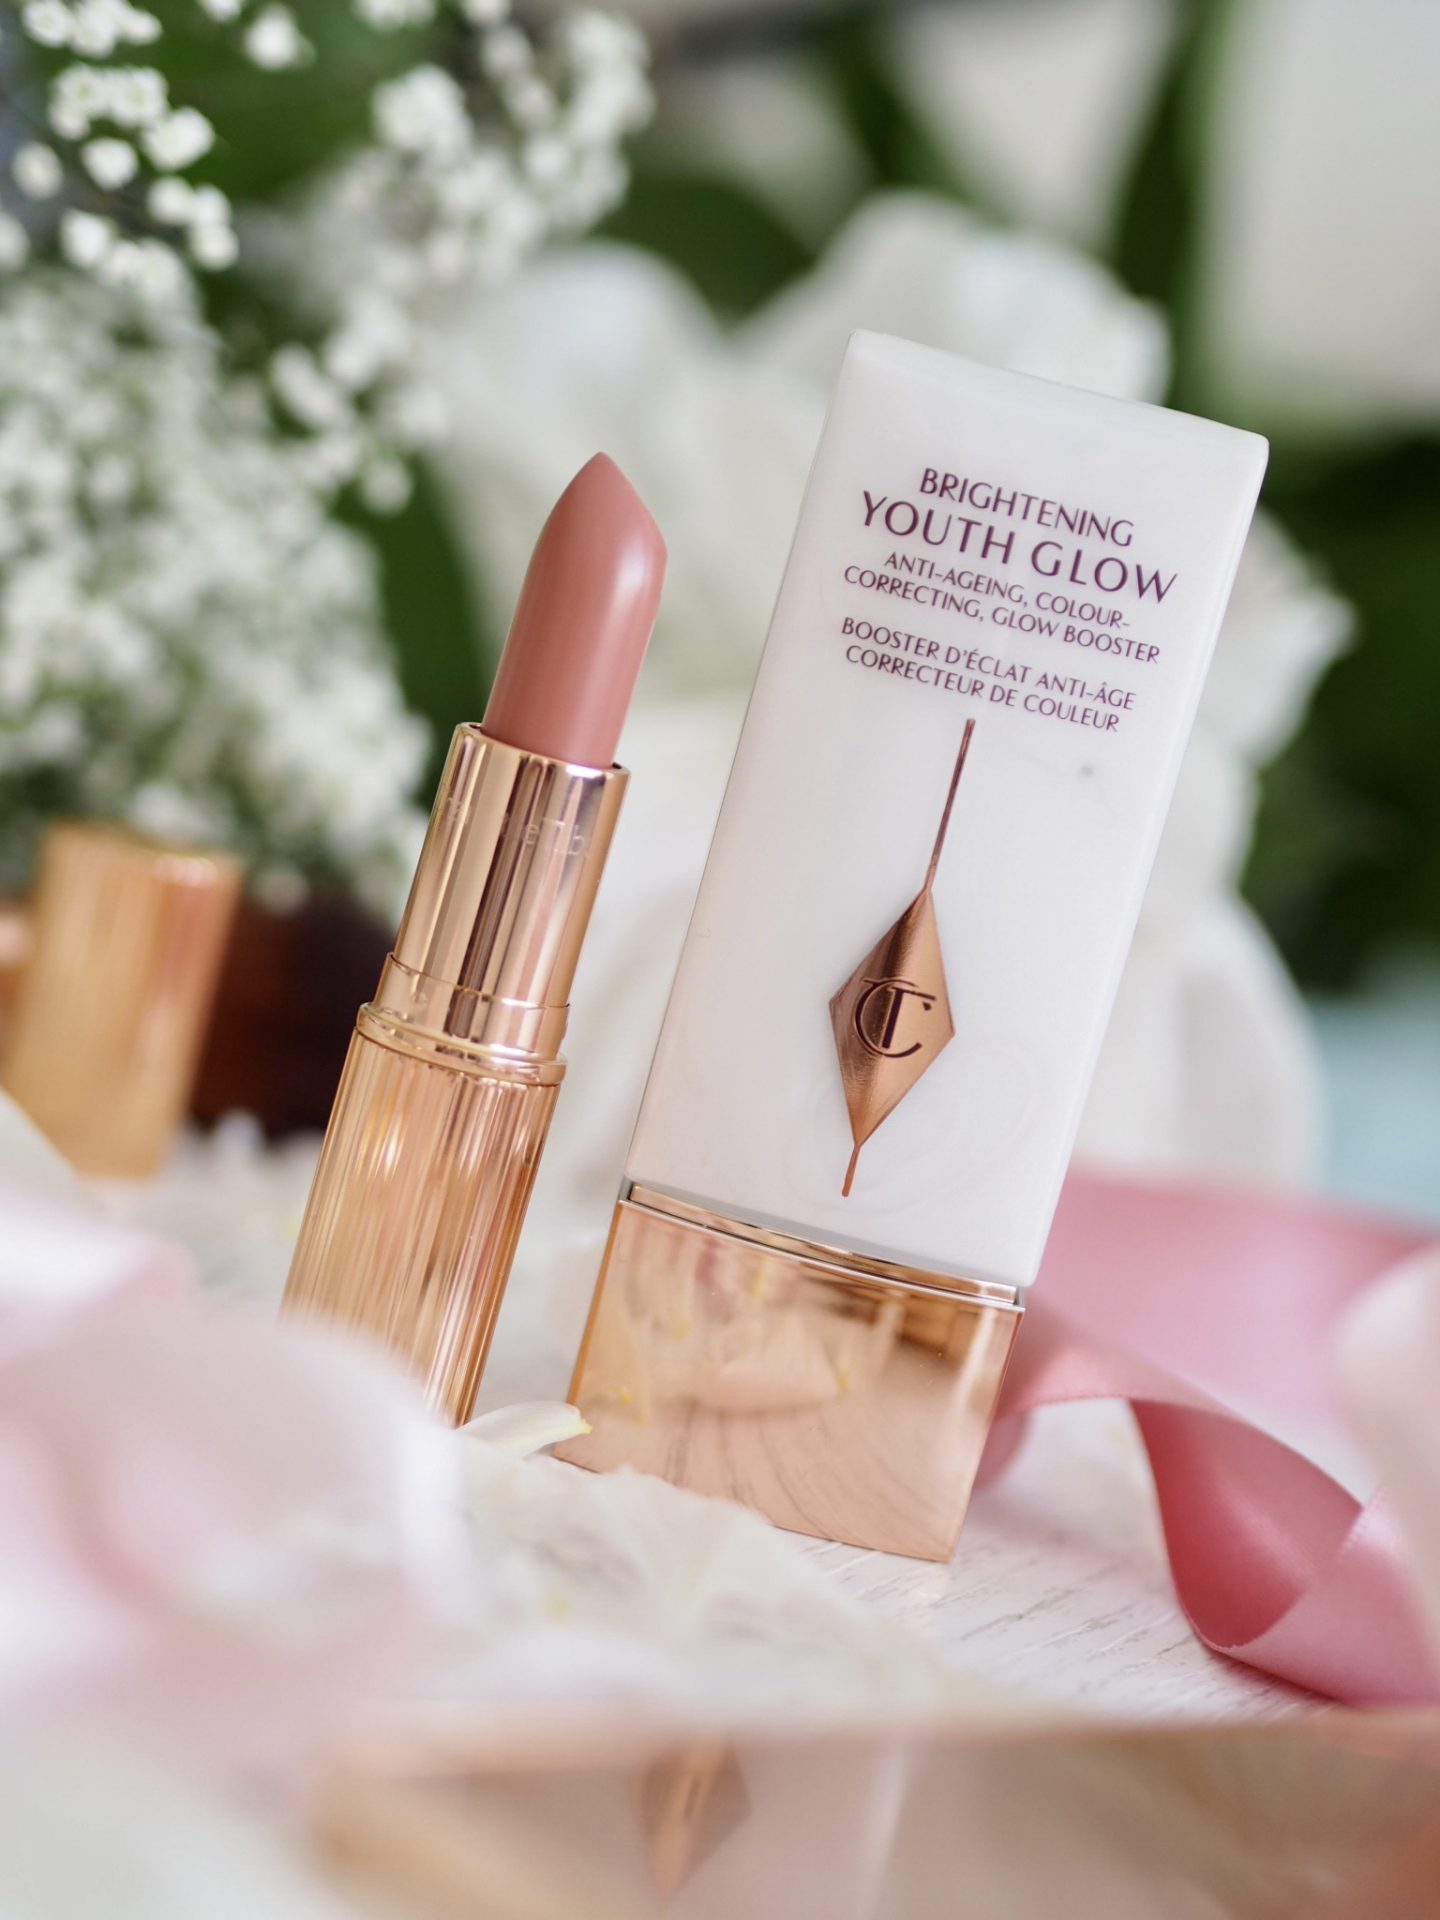 Two from Charlotte Tilbury Bitch Perfect Kissing lipstick brightening Youth Glow primer